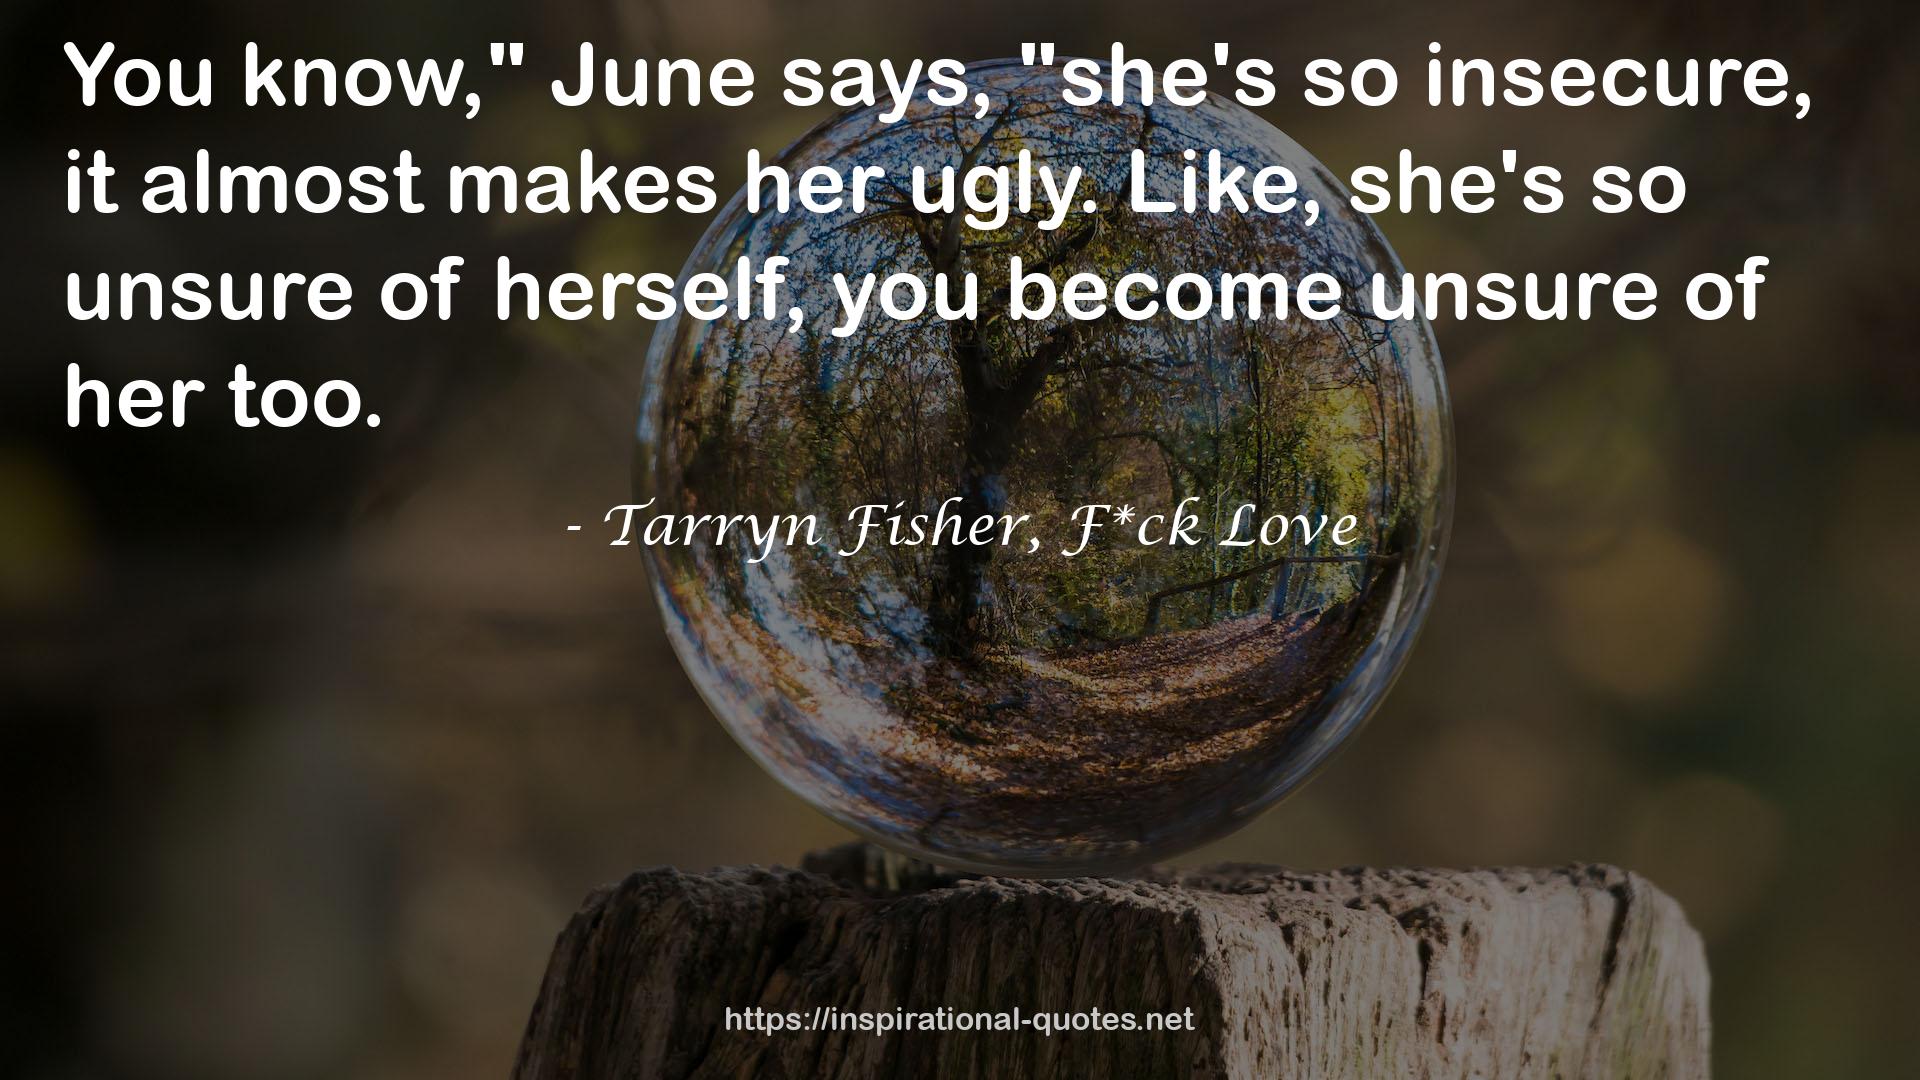 Tarryn Fisher, F*ck Love QUOTES